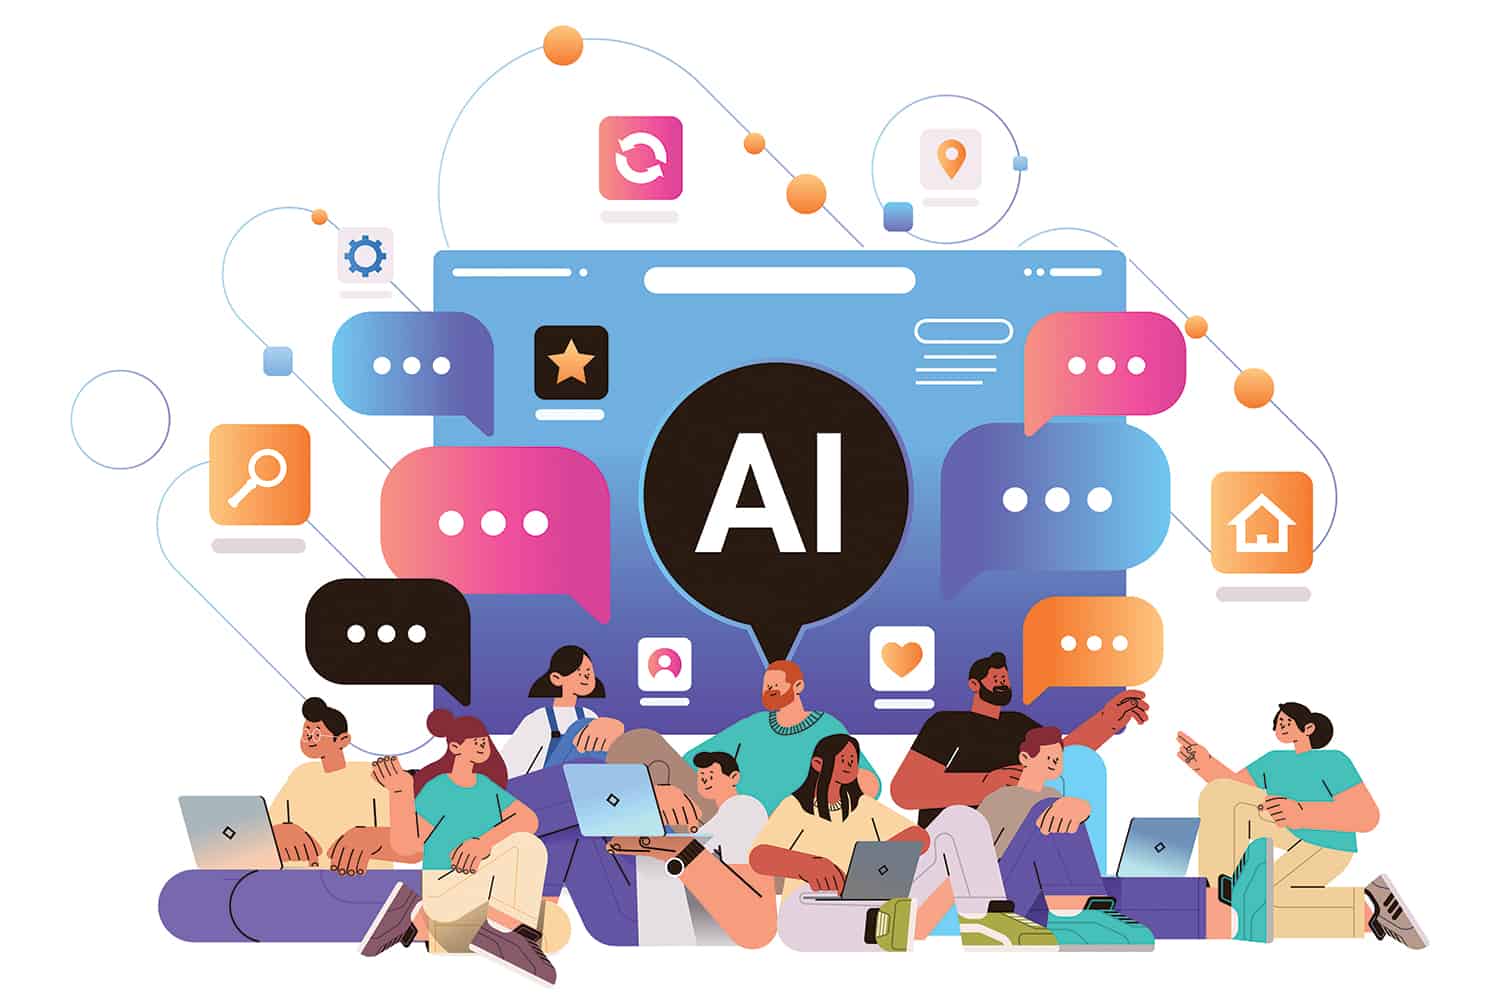 graphic of cartoon figures sitting in group in front of a big screen with ‘AI’ on it, working on laptops and interconnecting